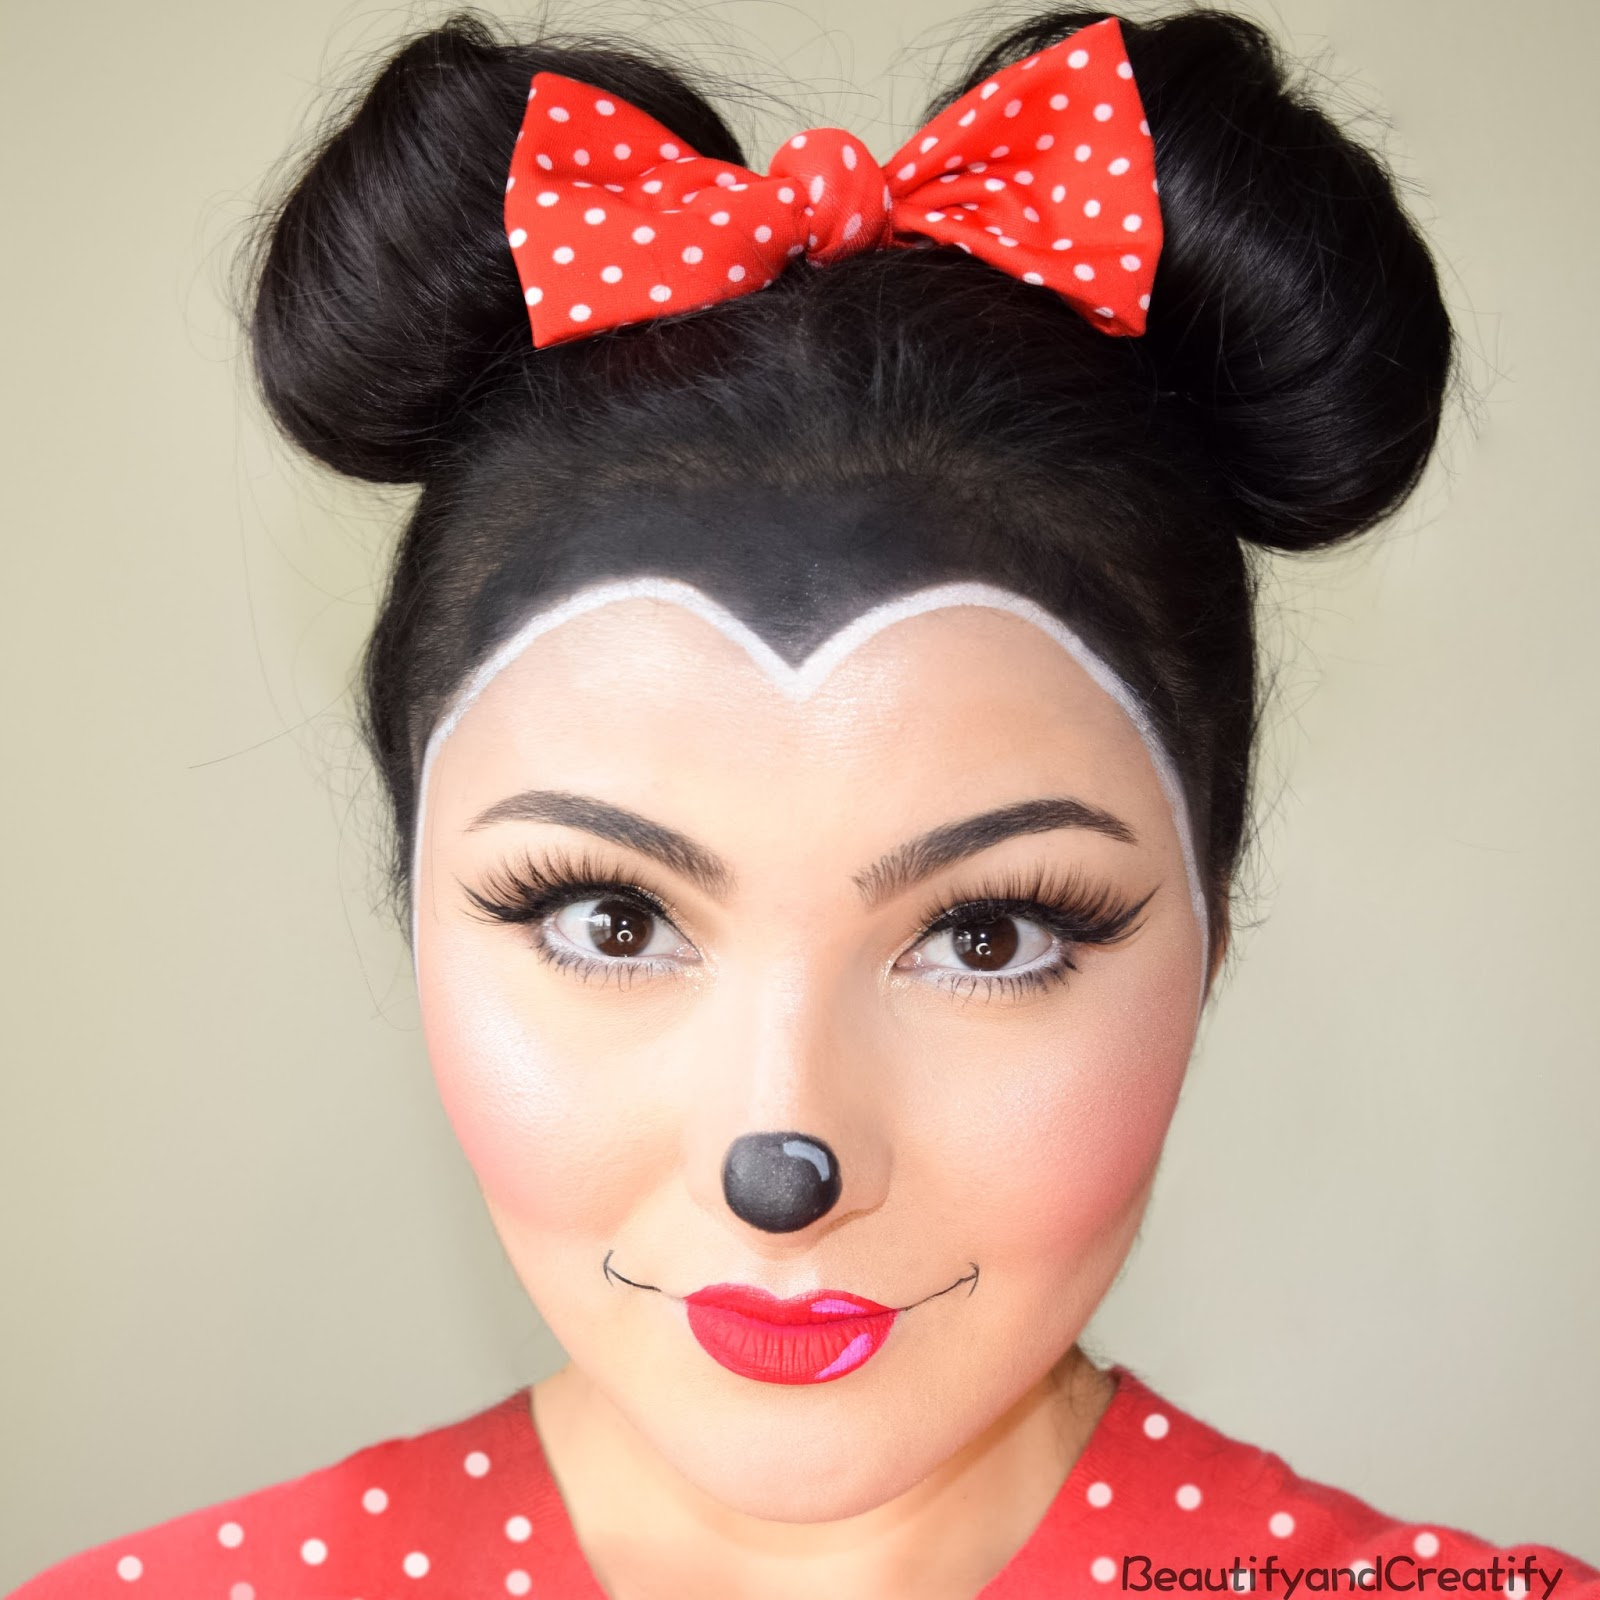 Minnie Mouse Eye Makeup Minnie Mouse Makeup And Hair Tutorial Easy Halloween Costume